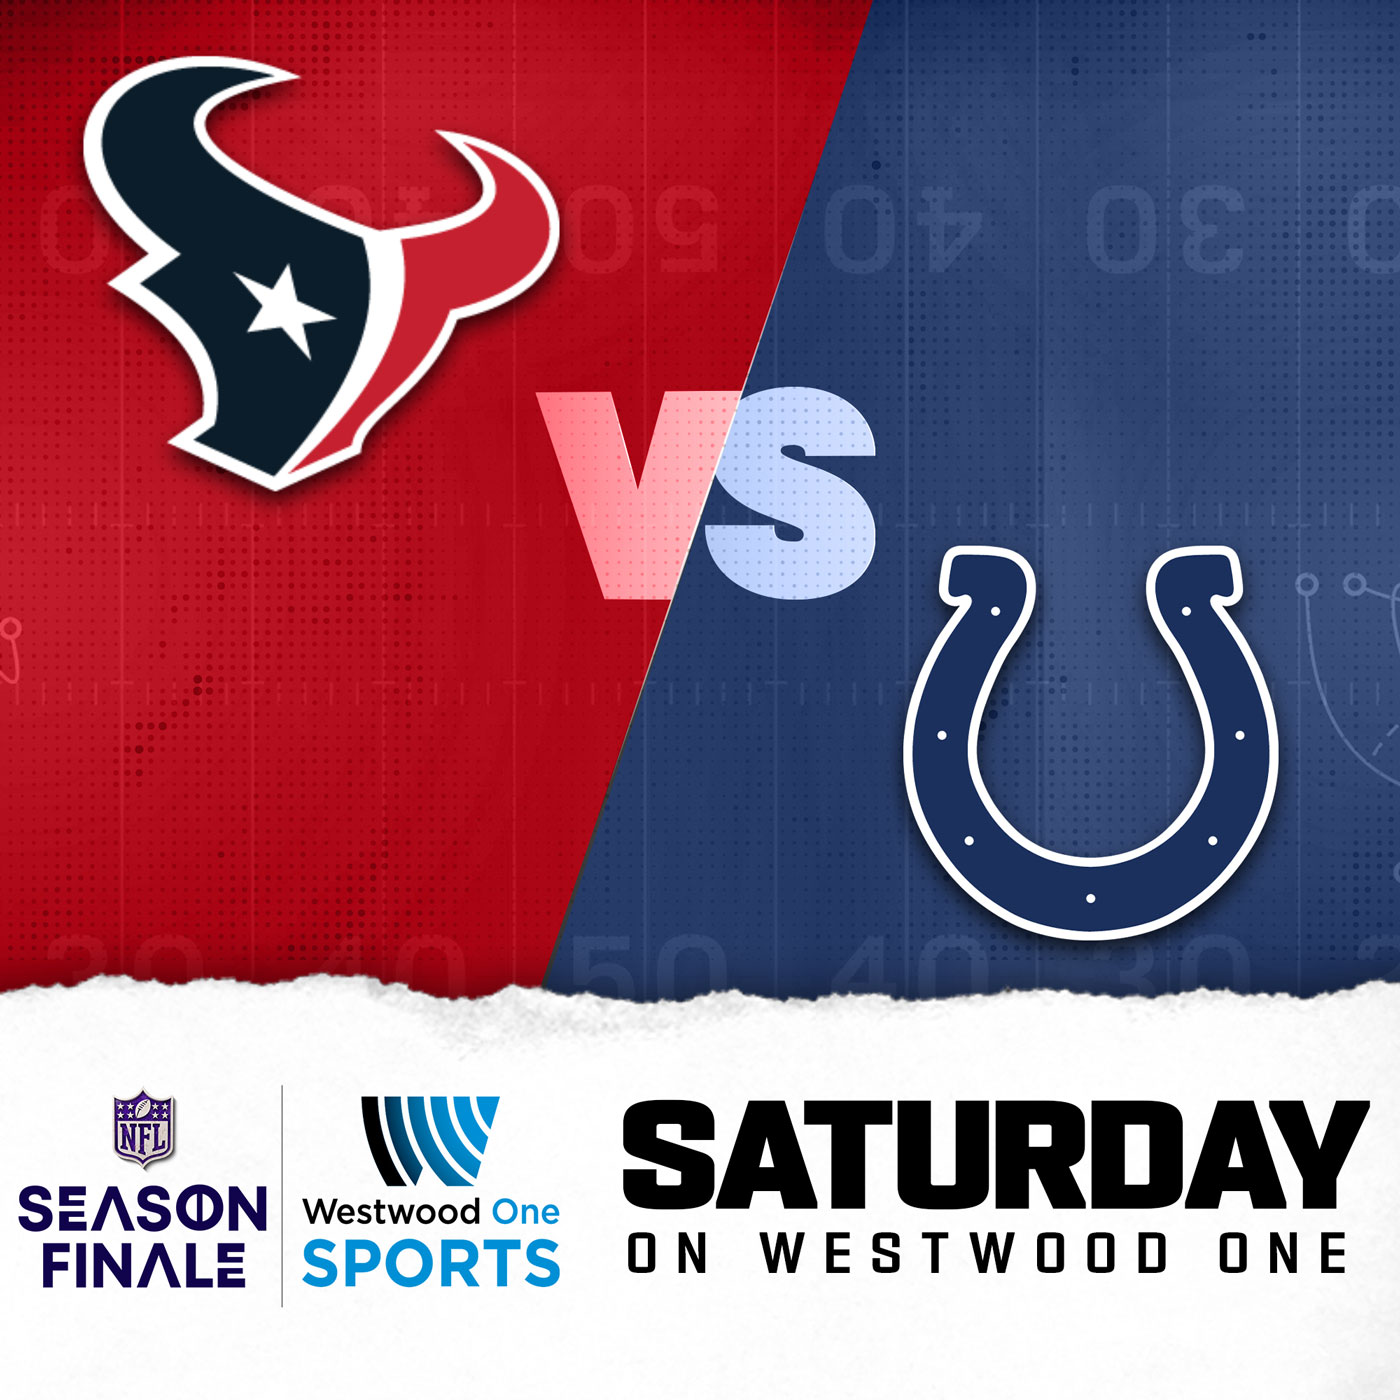 HOU 23-17 Texans Stop Colts on 4th Down